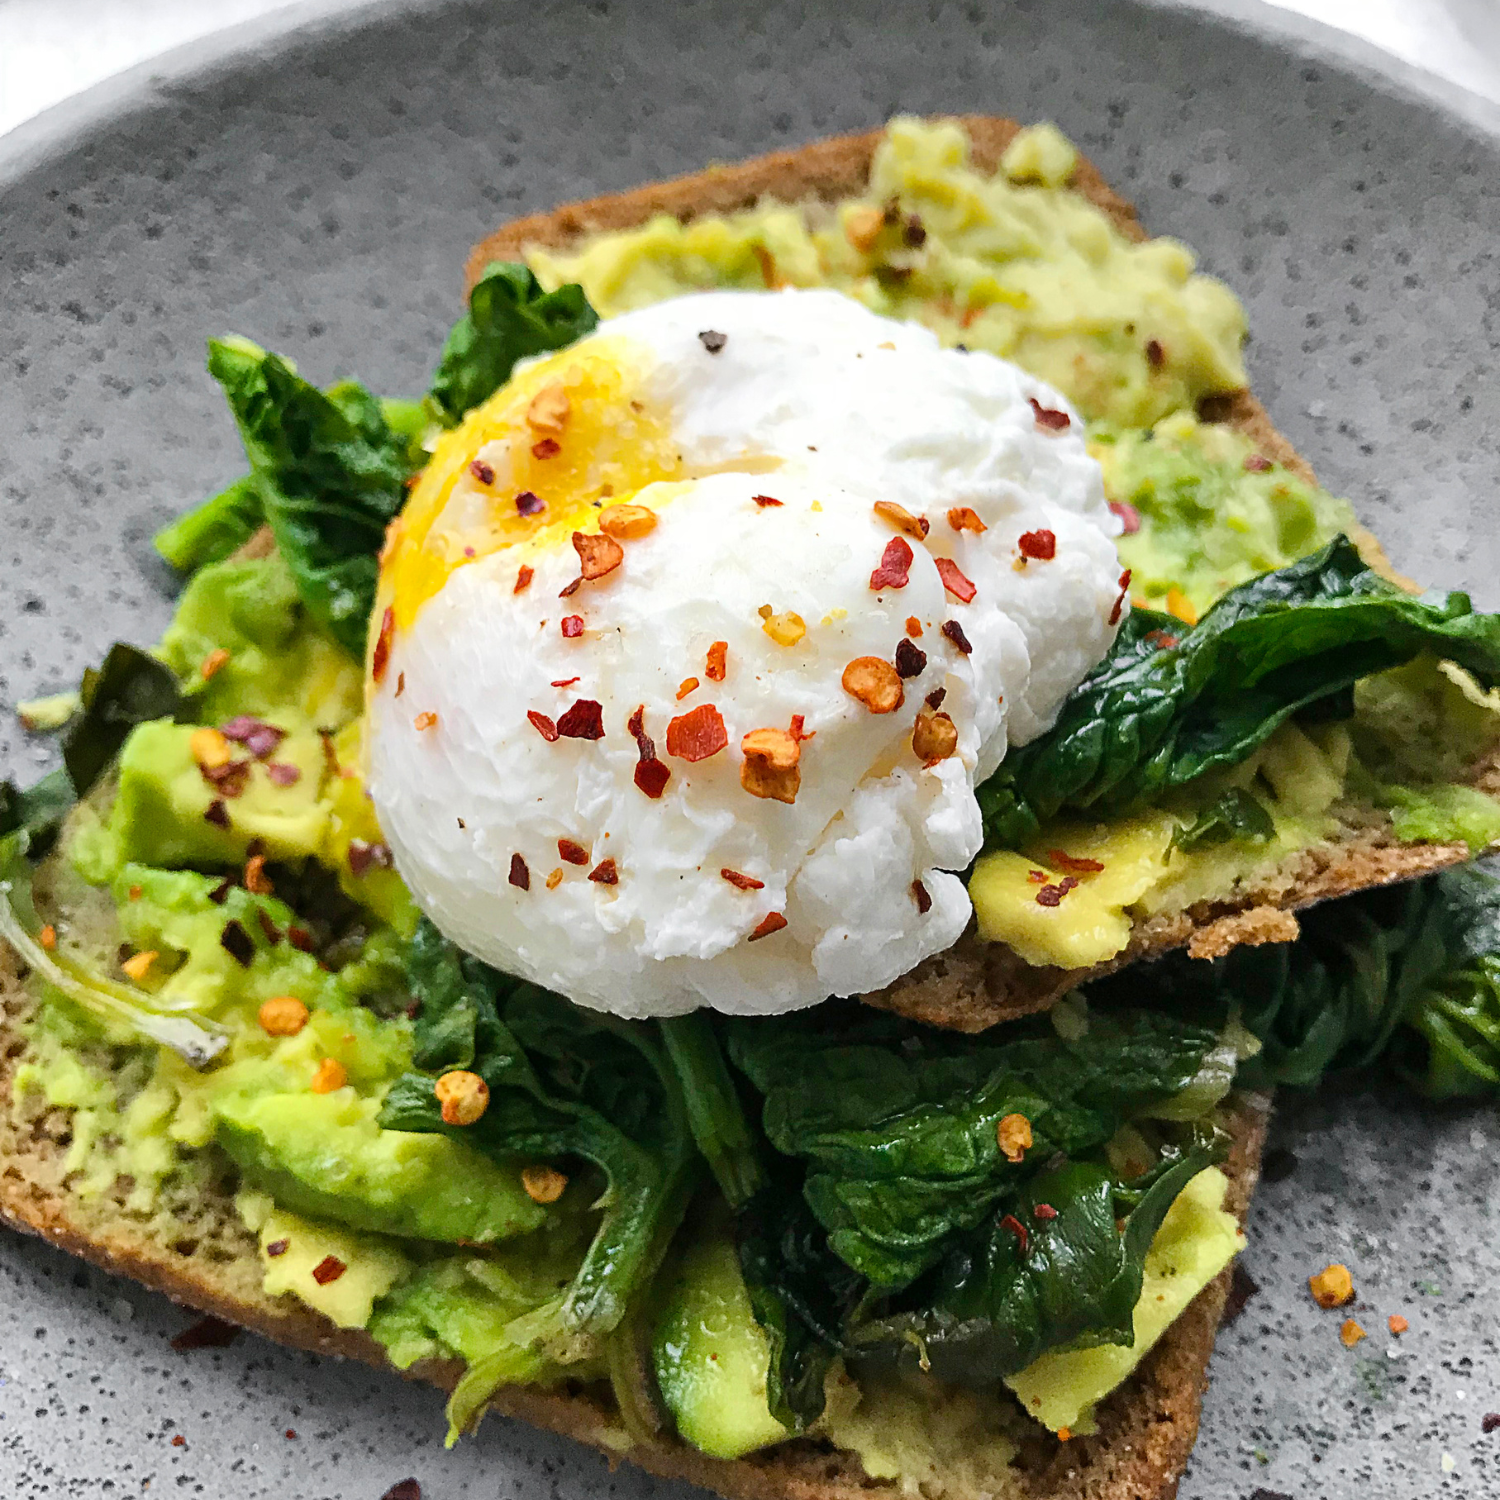 Where did avocado toast come from?